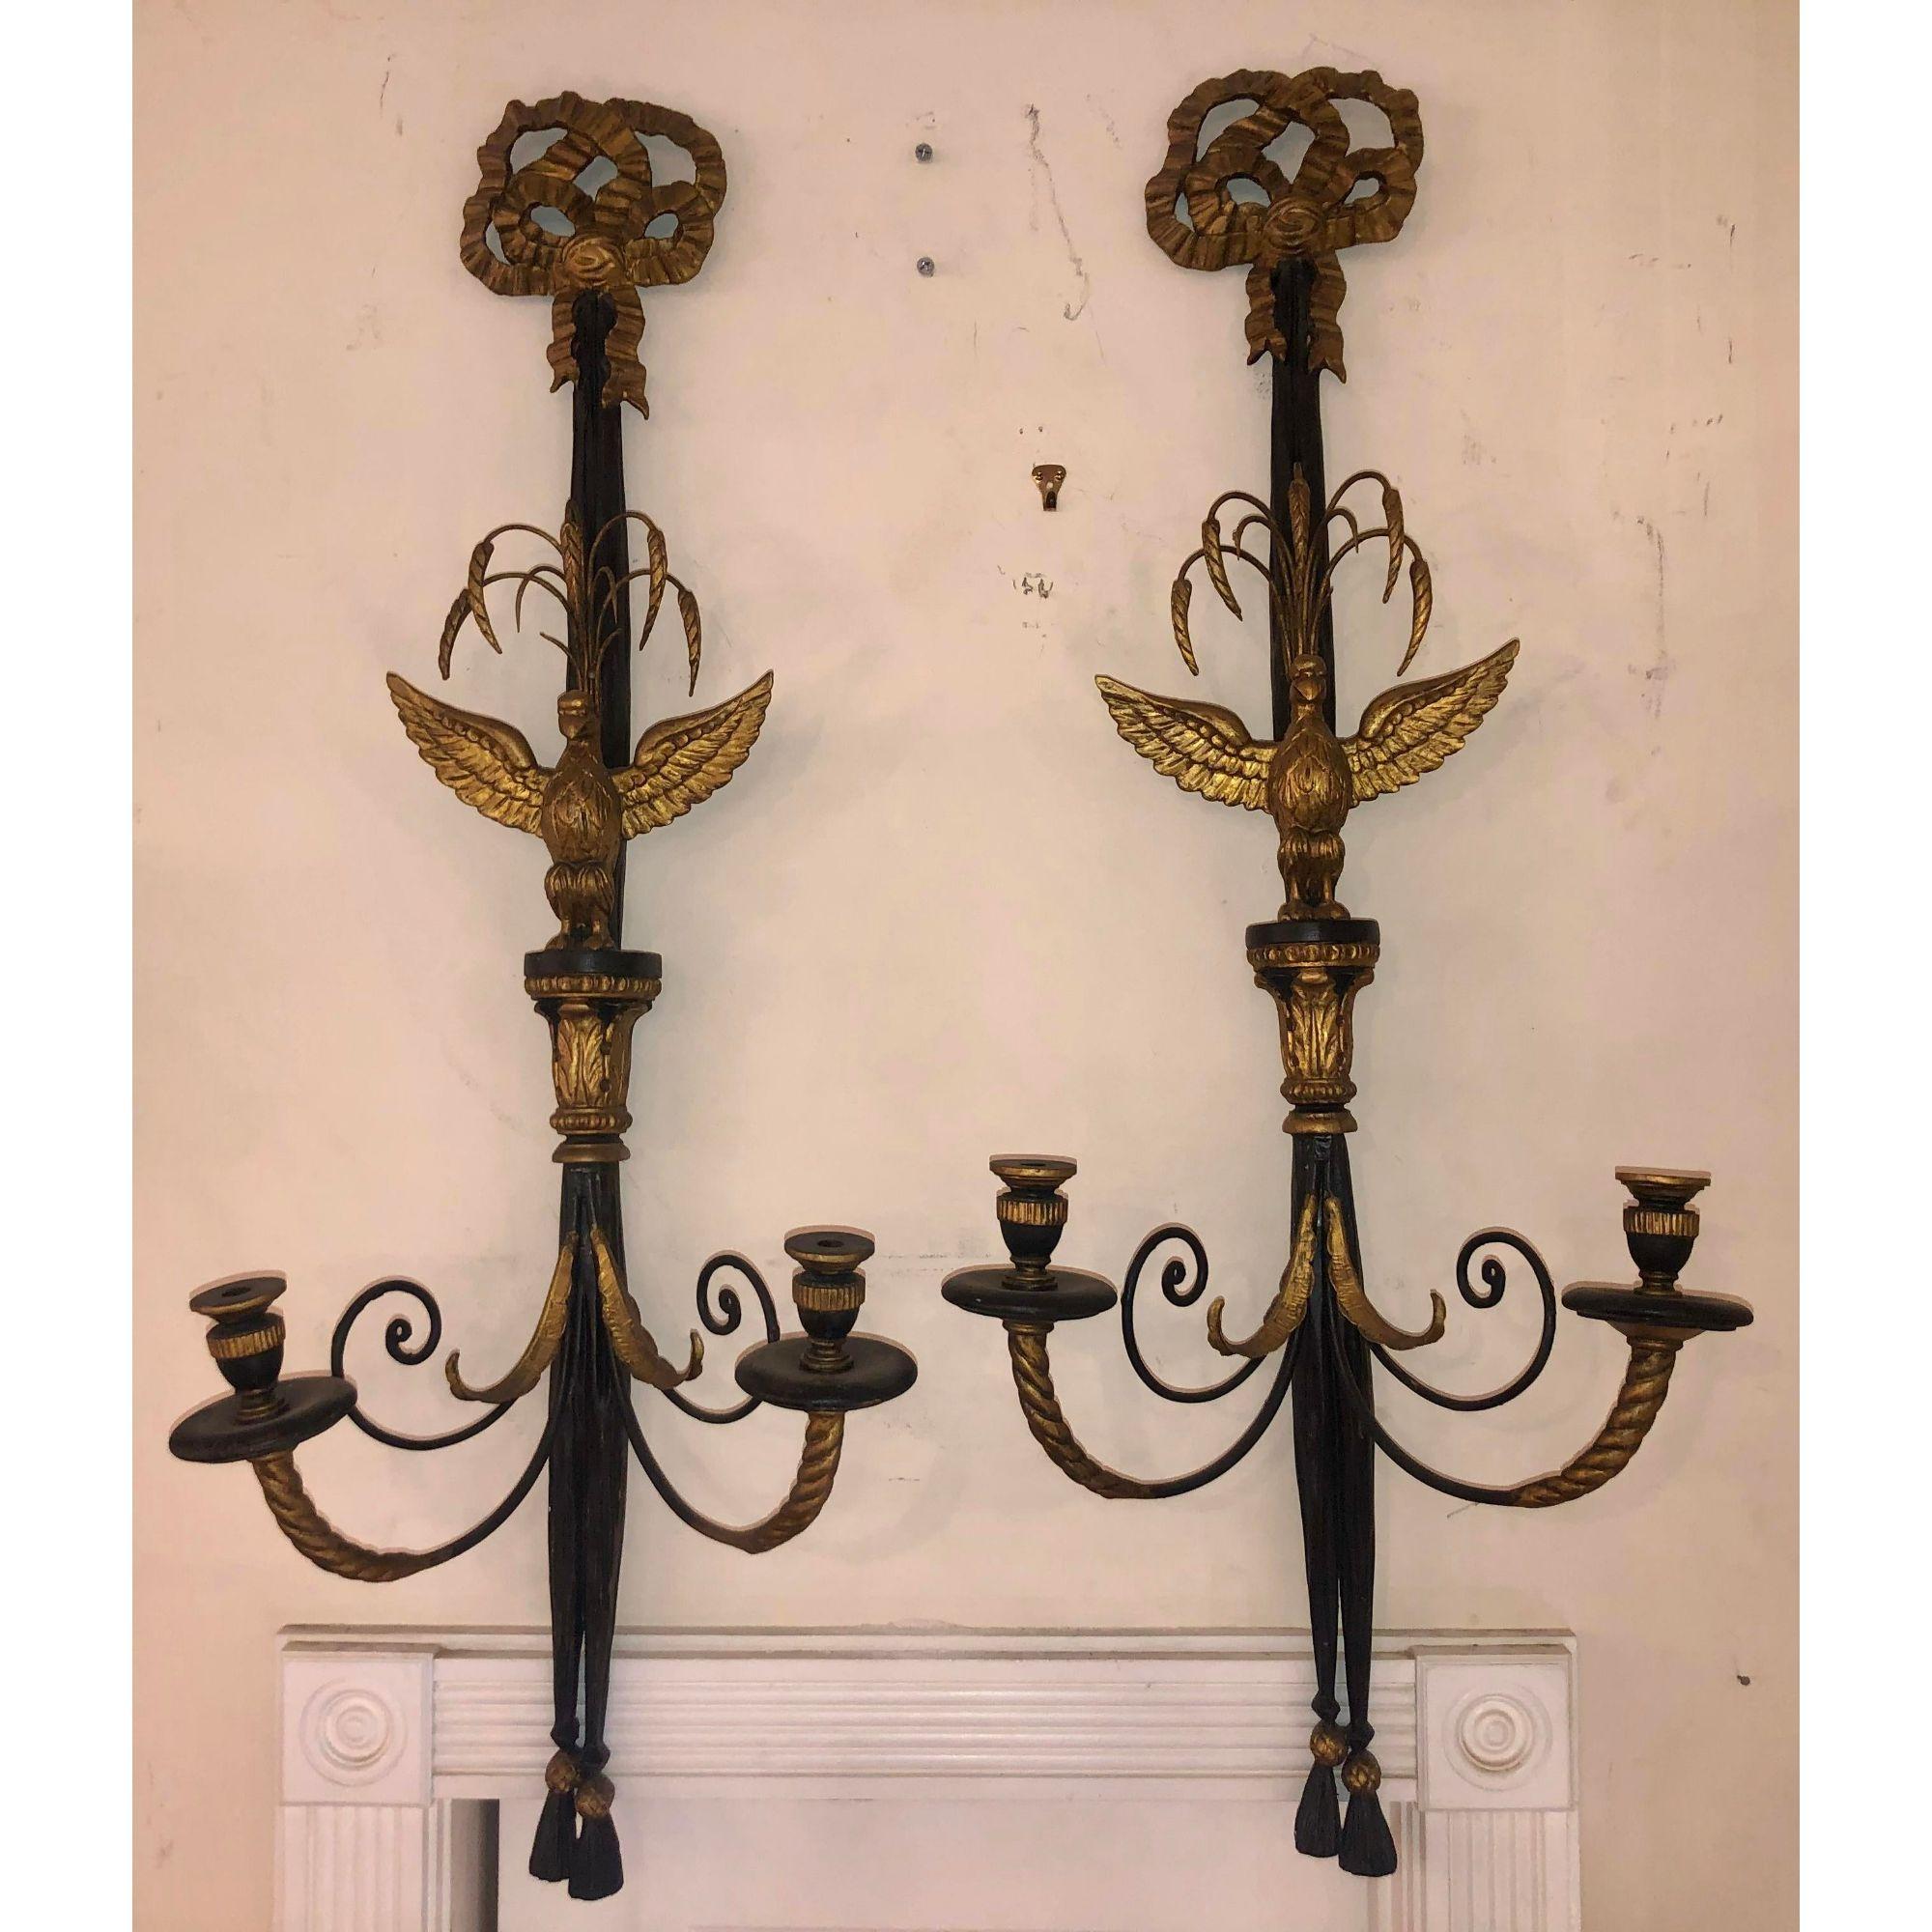 Pair of Vintage Hollywood Regency Style candelabra sconces.

Additional information: 
Materials: Giltwood
Color: Black
Period: 1950s
Place of Origin: Italy
Styles: Federal, Hollywood Regency
Item Type: Vintage, Antique or